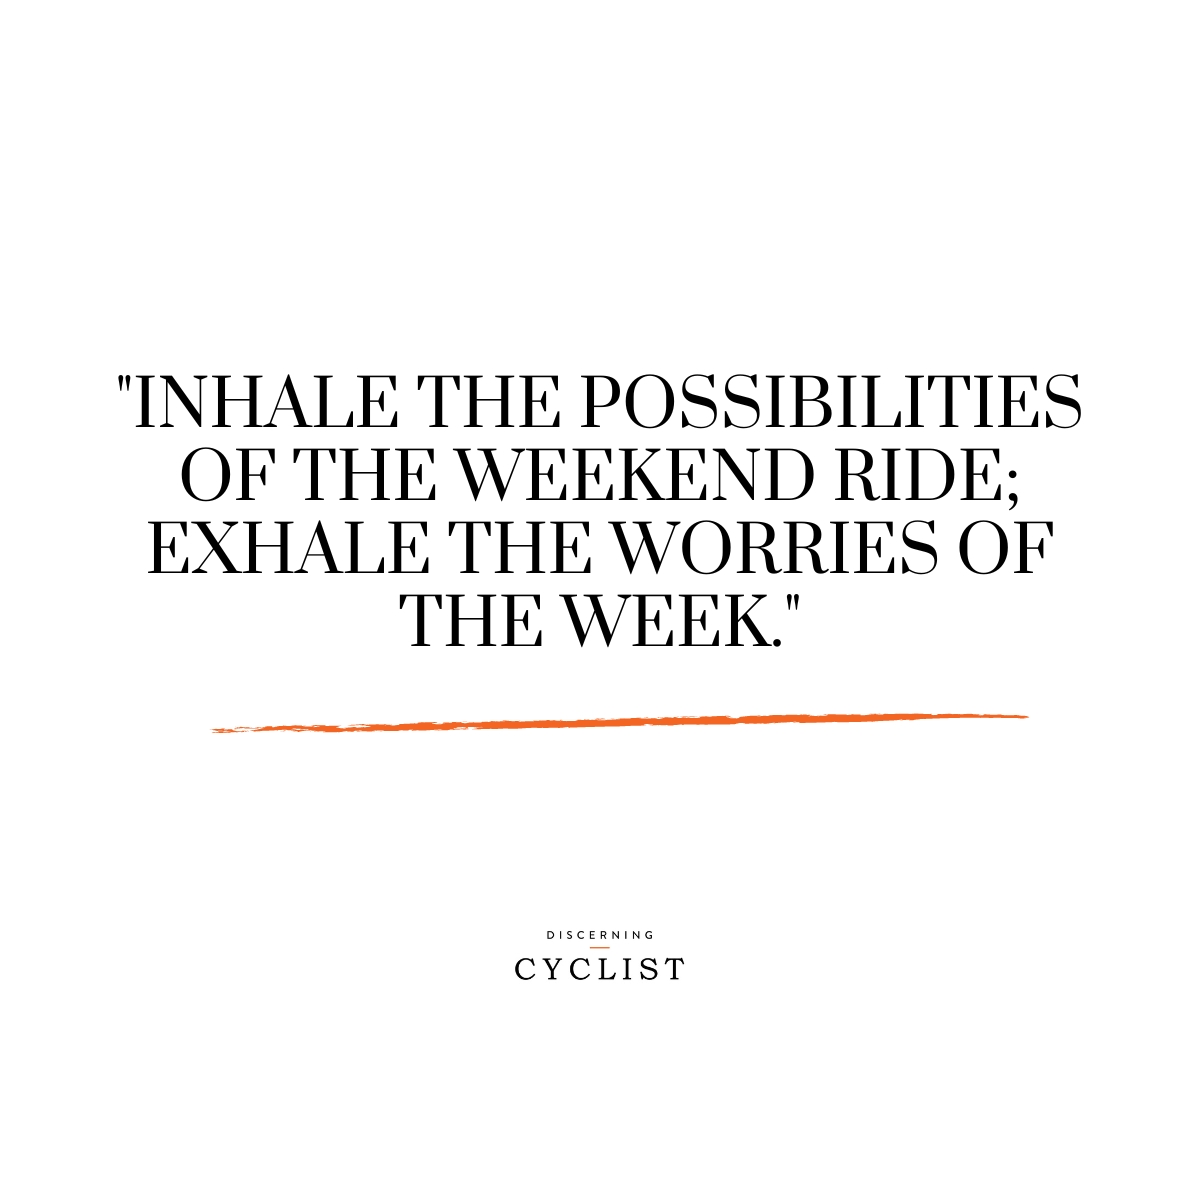 "Inhale the possibilities of the weekend ride; exhale the worries of the week."